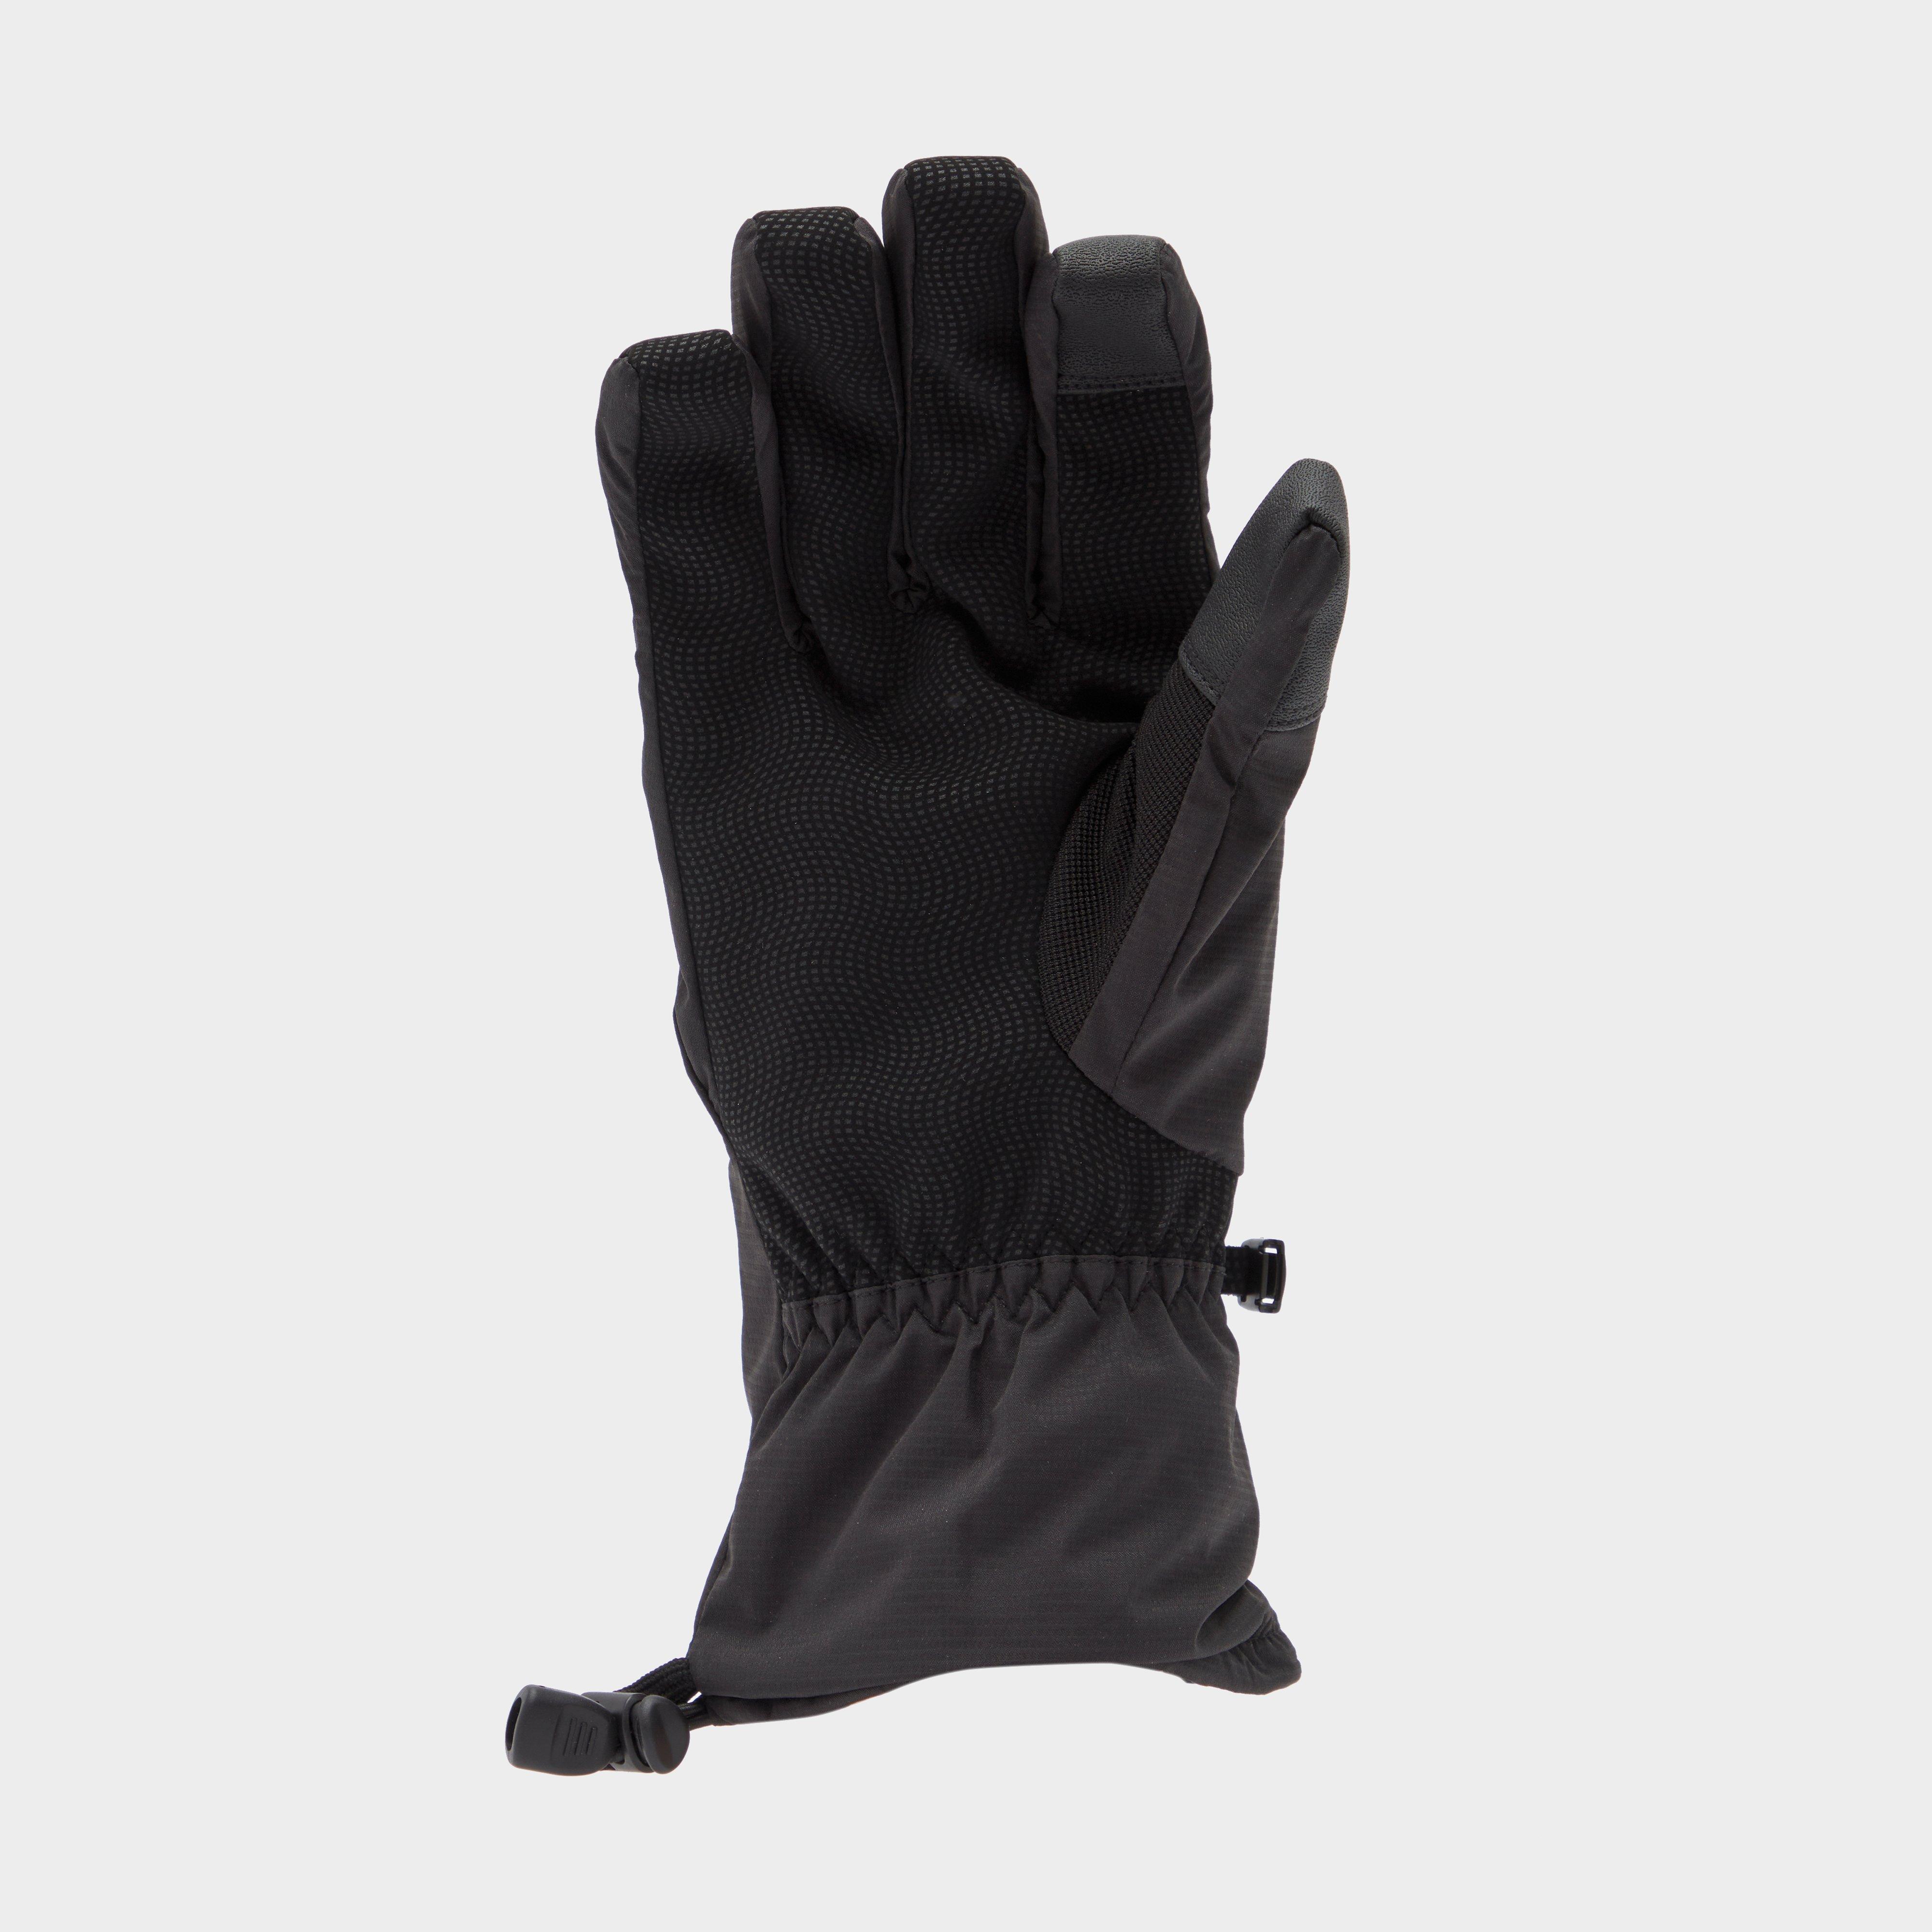 Trekmates ClassicDRY Lite Gloves (Unisex) Review